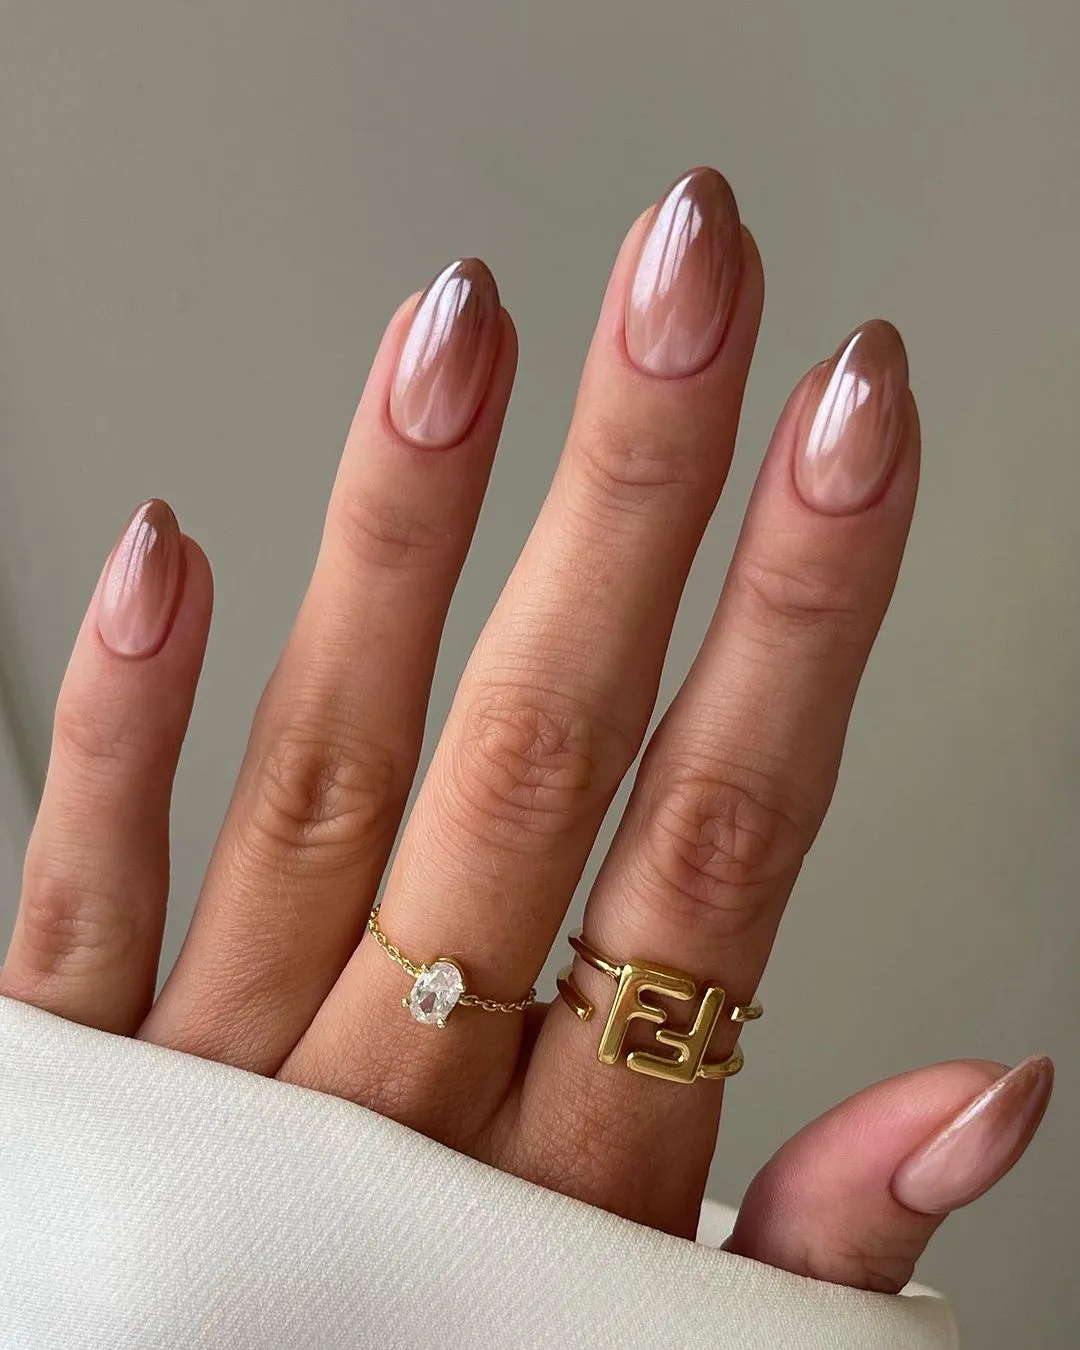 Jennifer Lopez showed the perfect nail color for minimalists: what are the benefits of American manicure